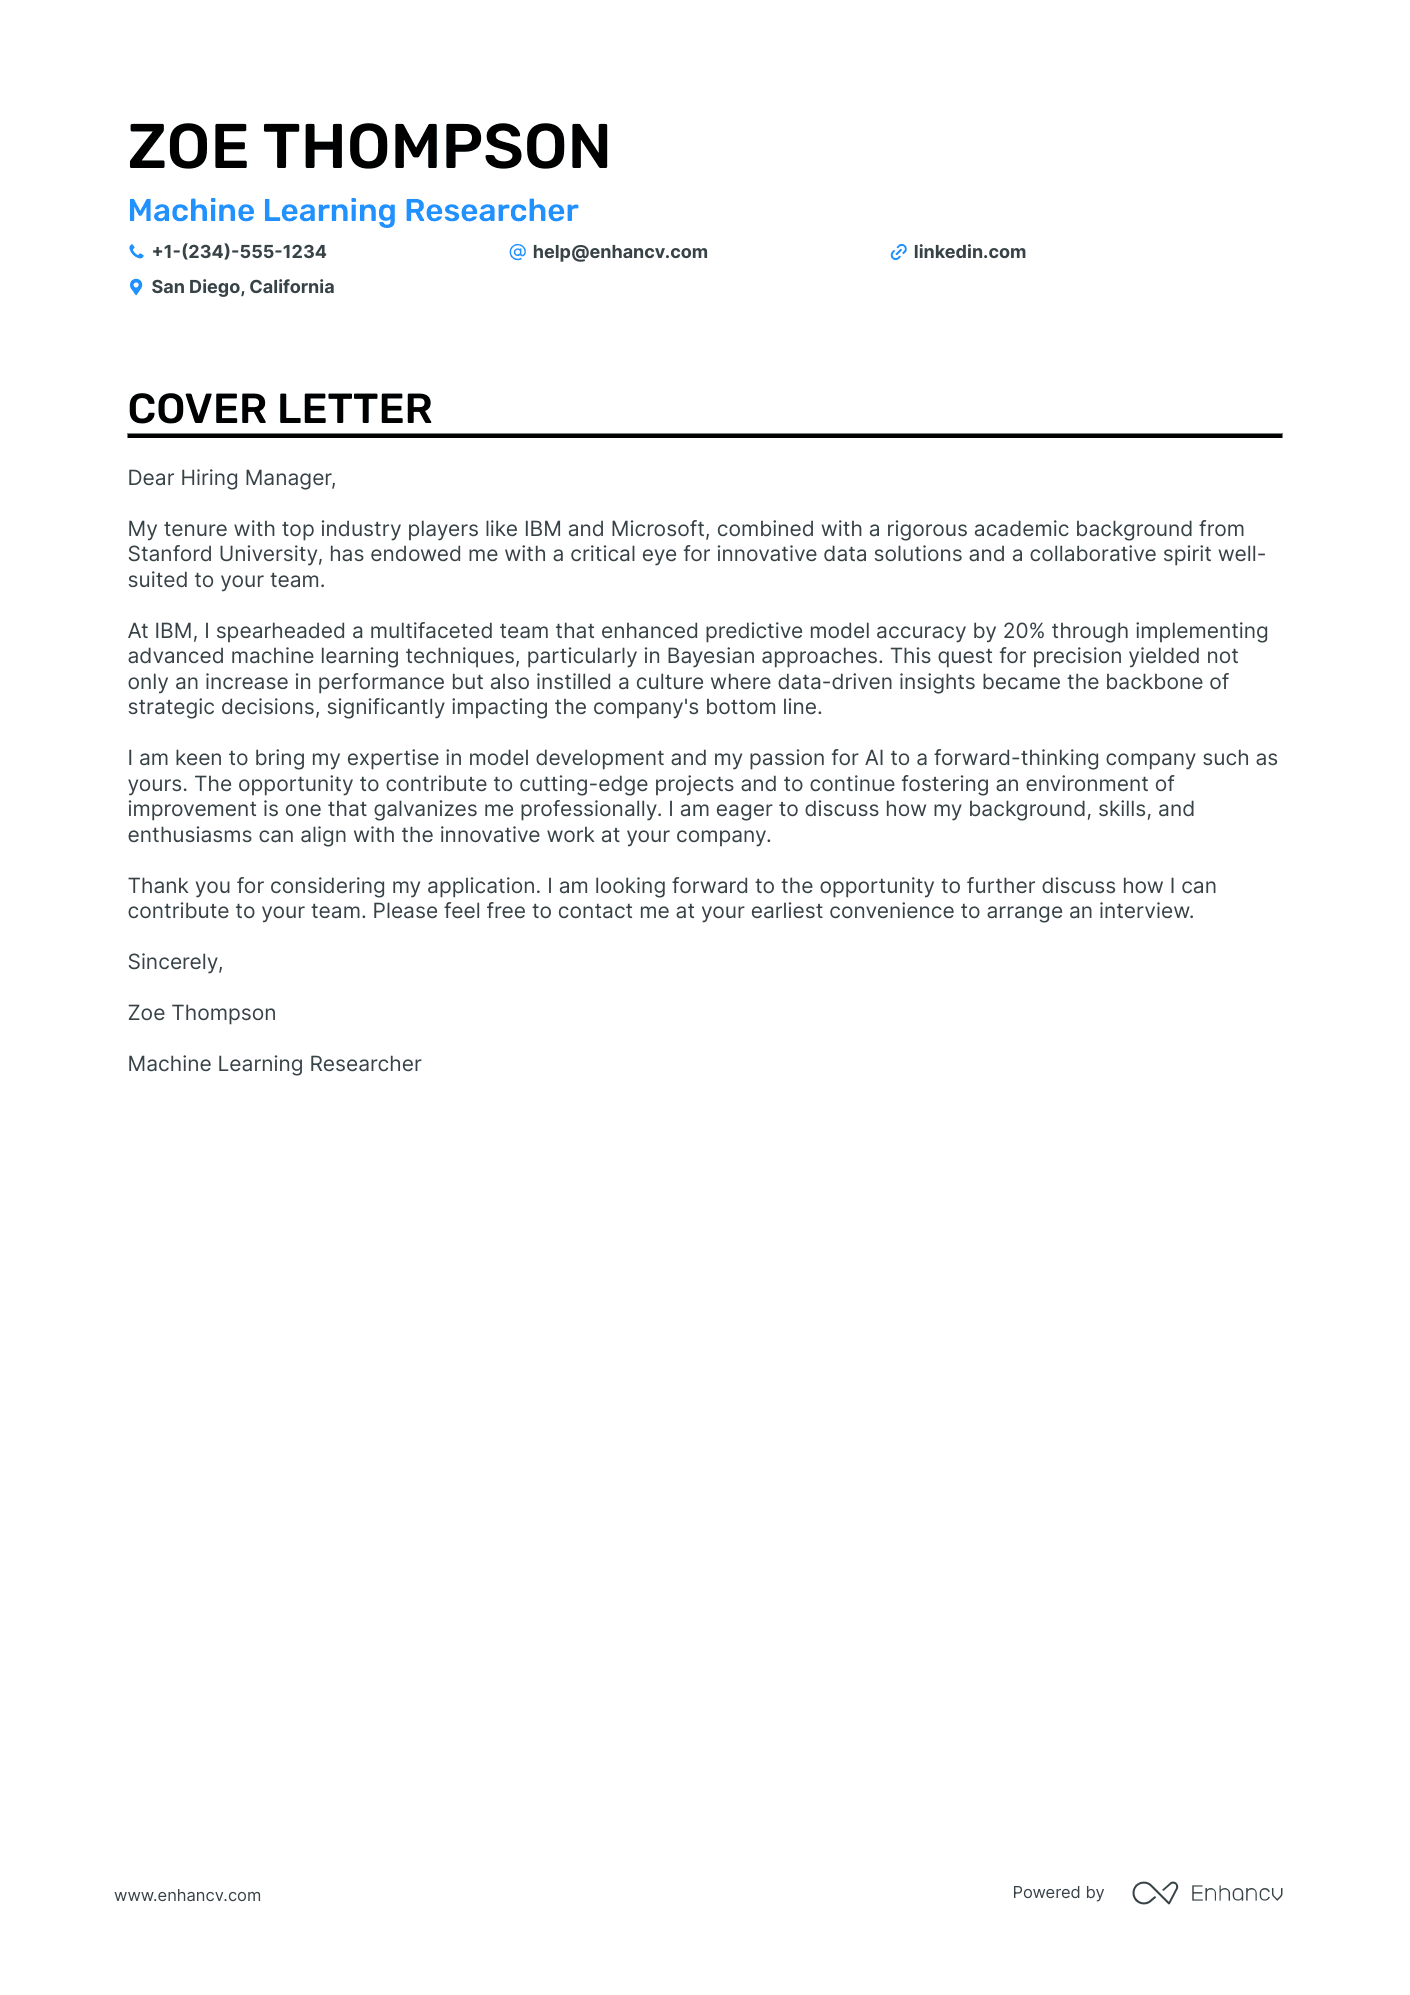 cover letter as researcher